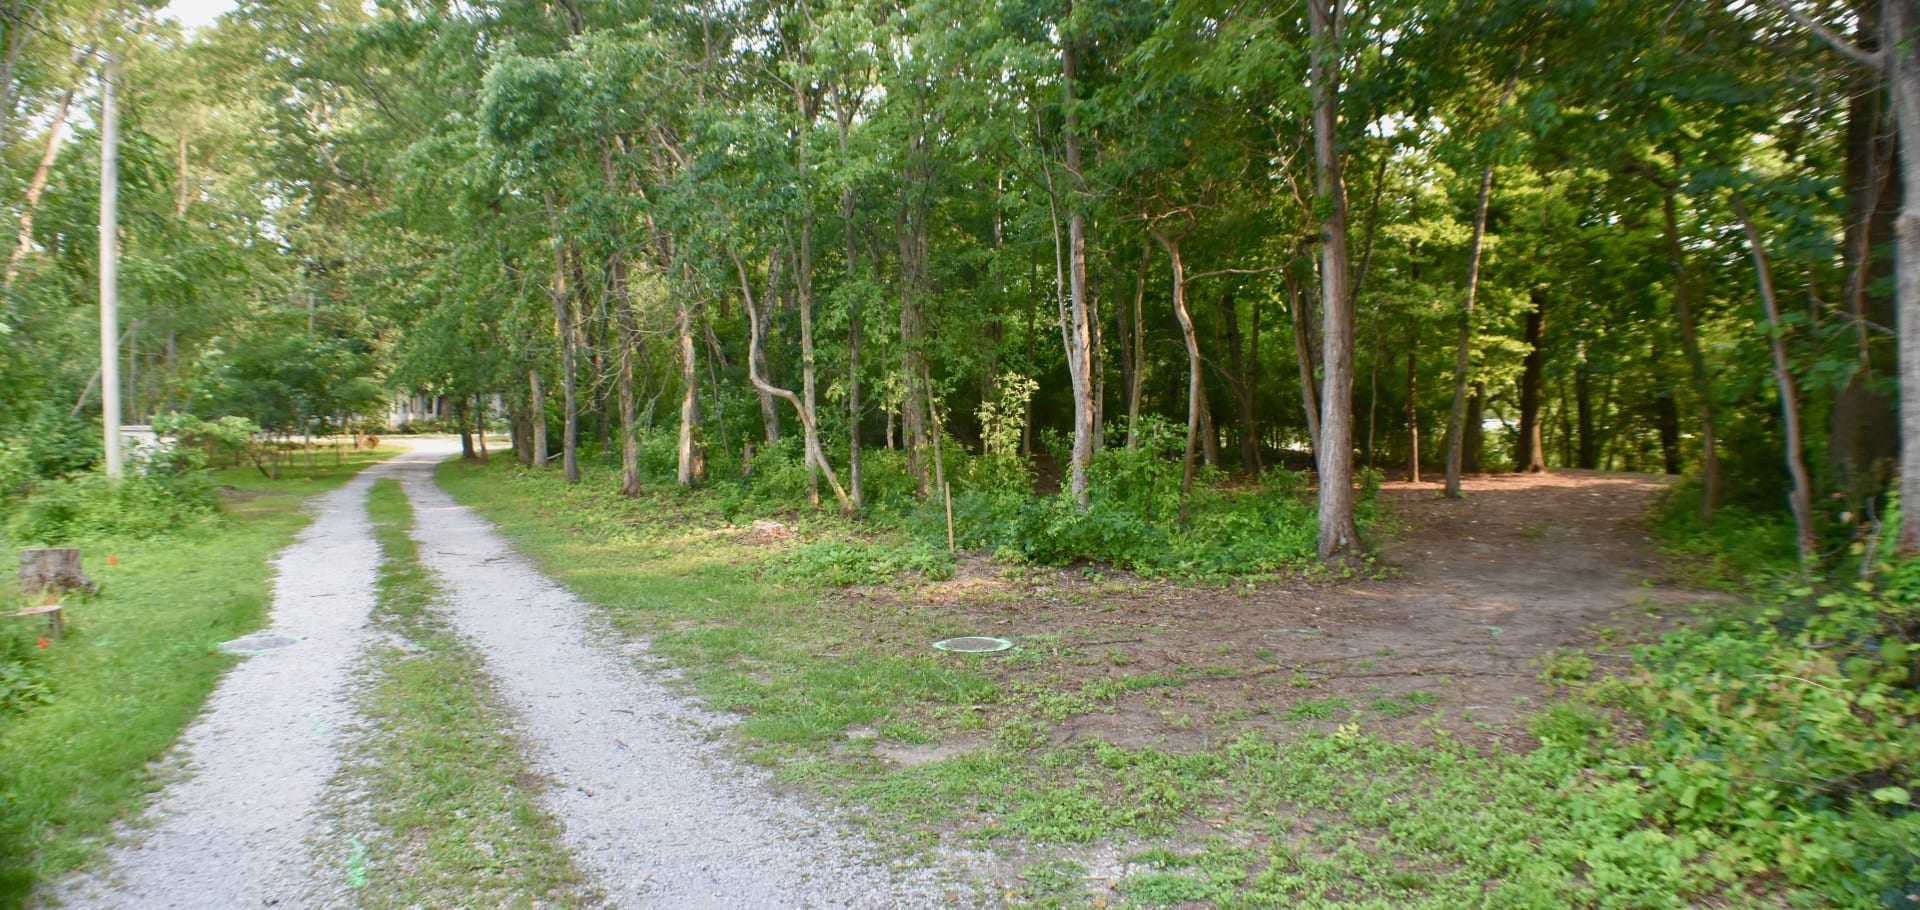 Entrance to Sunshine Acres with camp road to the right leading to camp areas.